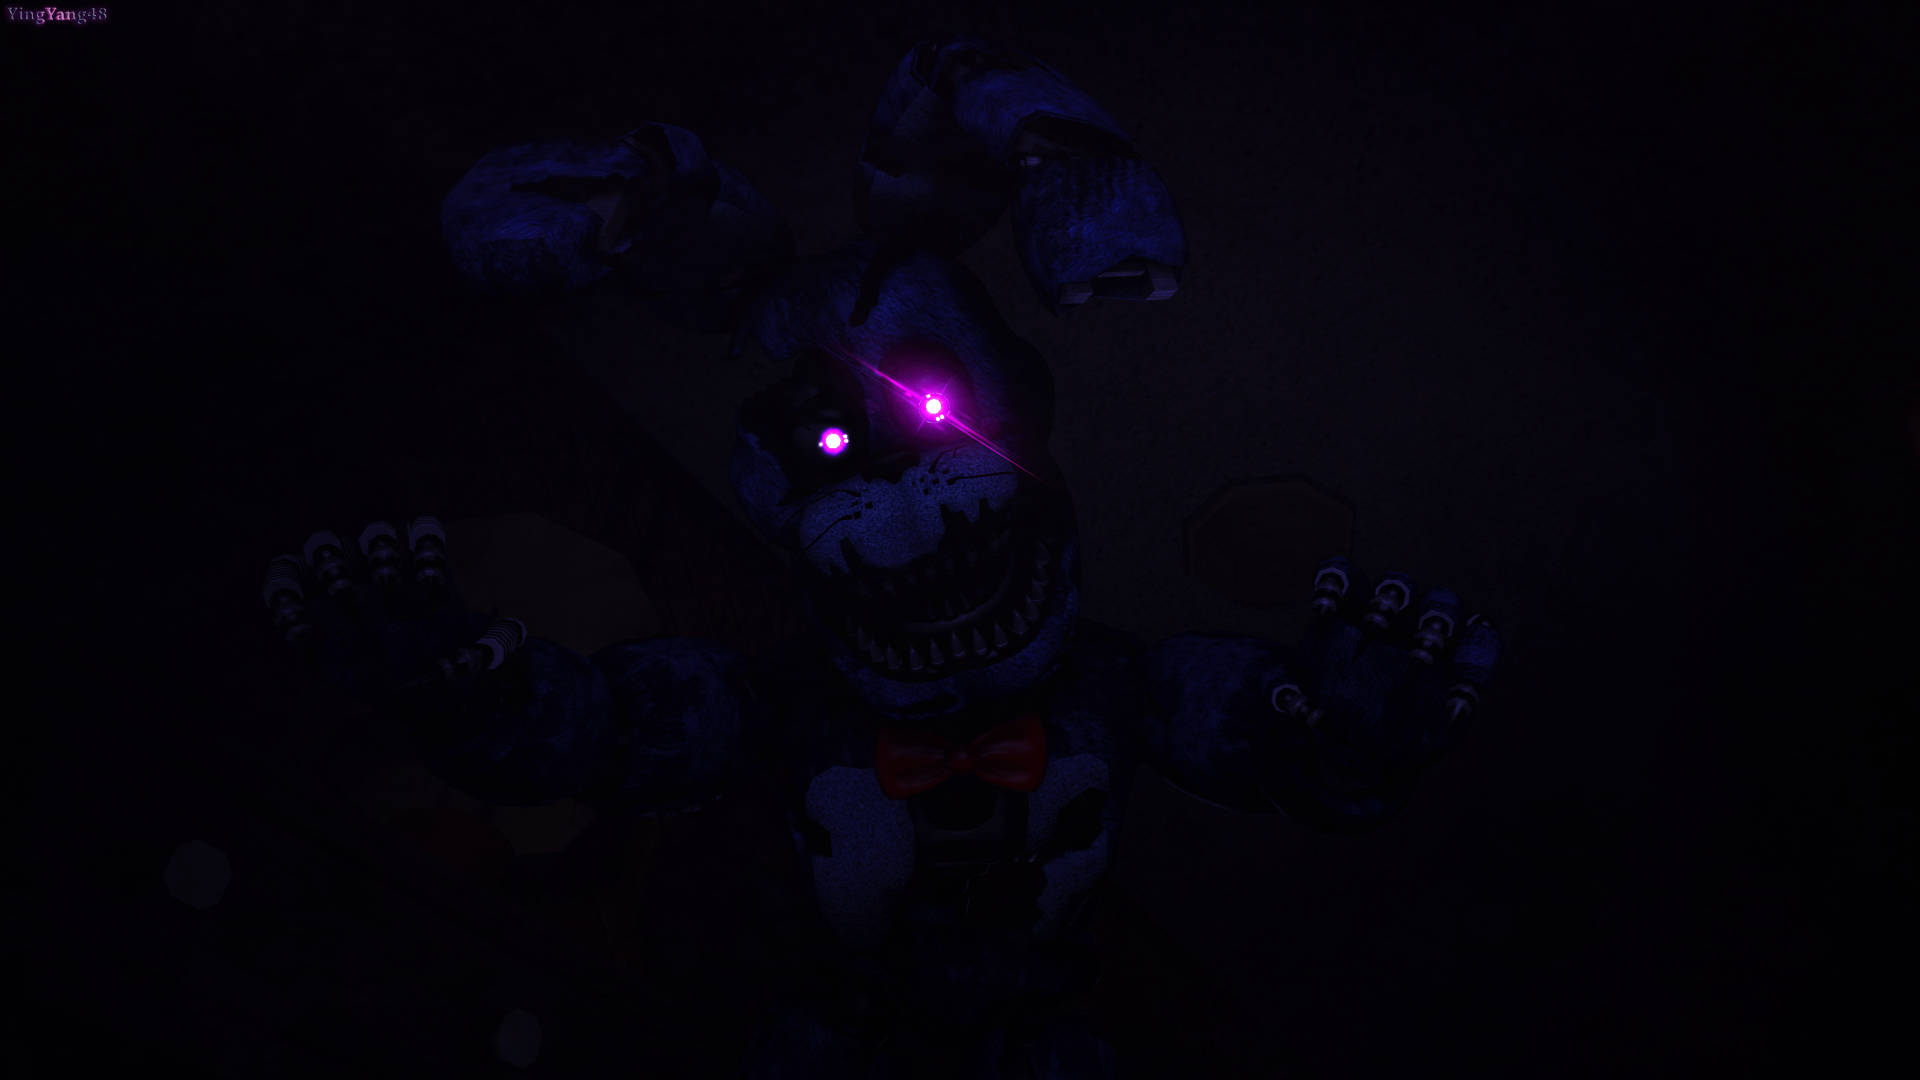 The Terrifying Nightmare Freddy From Five Nights At Freddy's Wallpaper